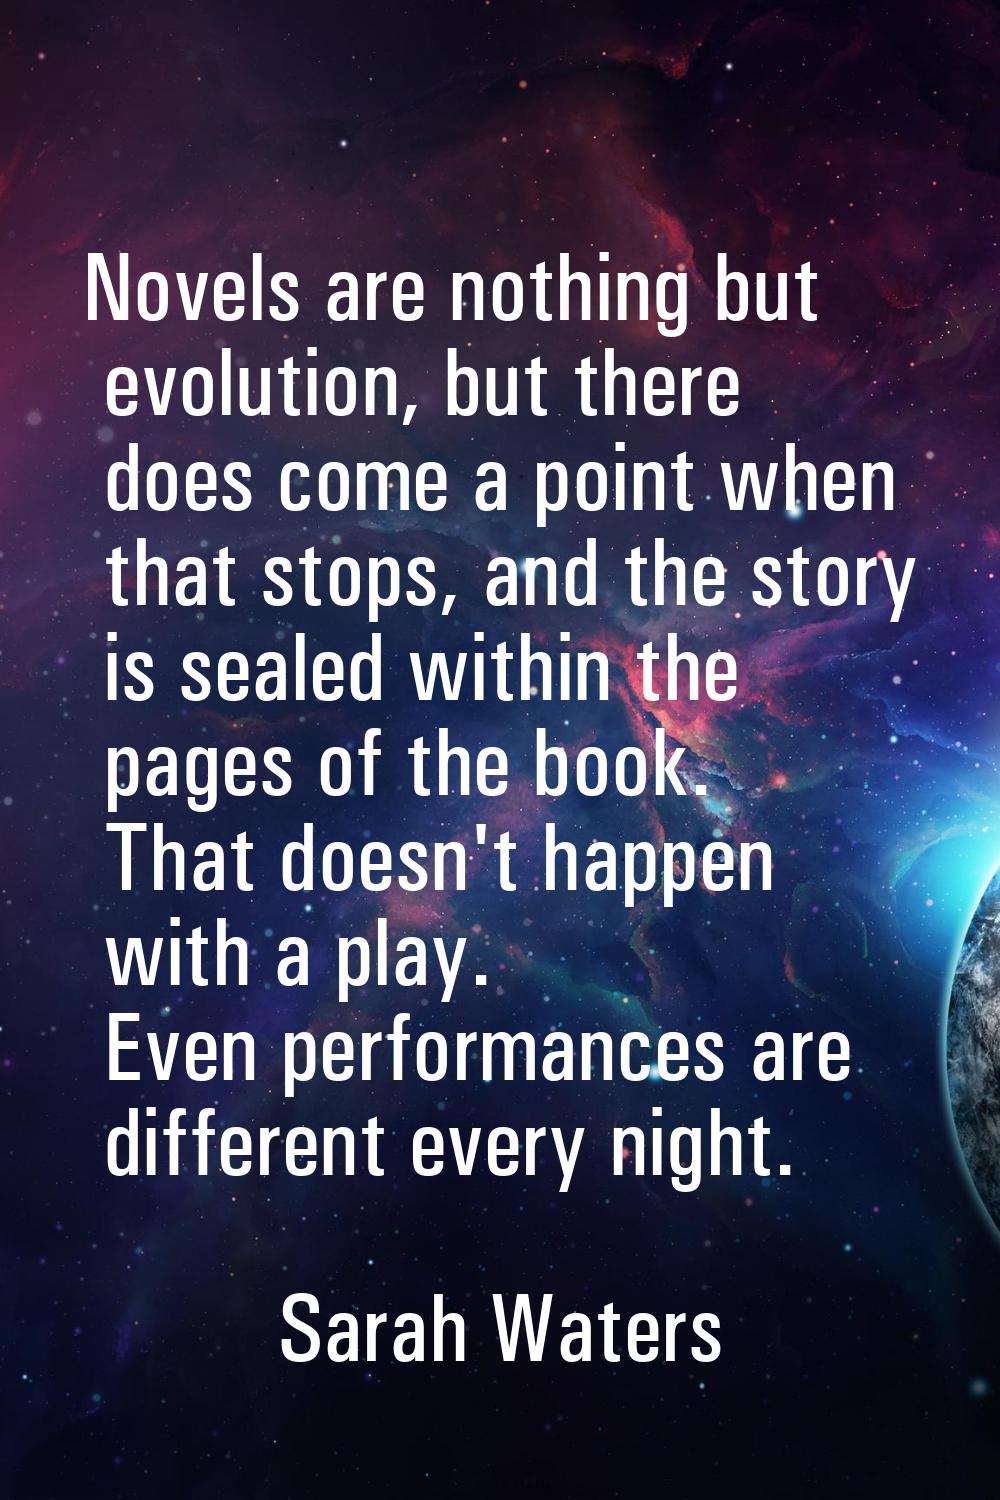 Novels are nothing but evolution, but there does come a point when that stops, and the story is sea